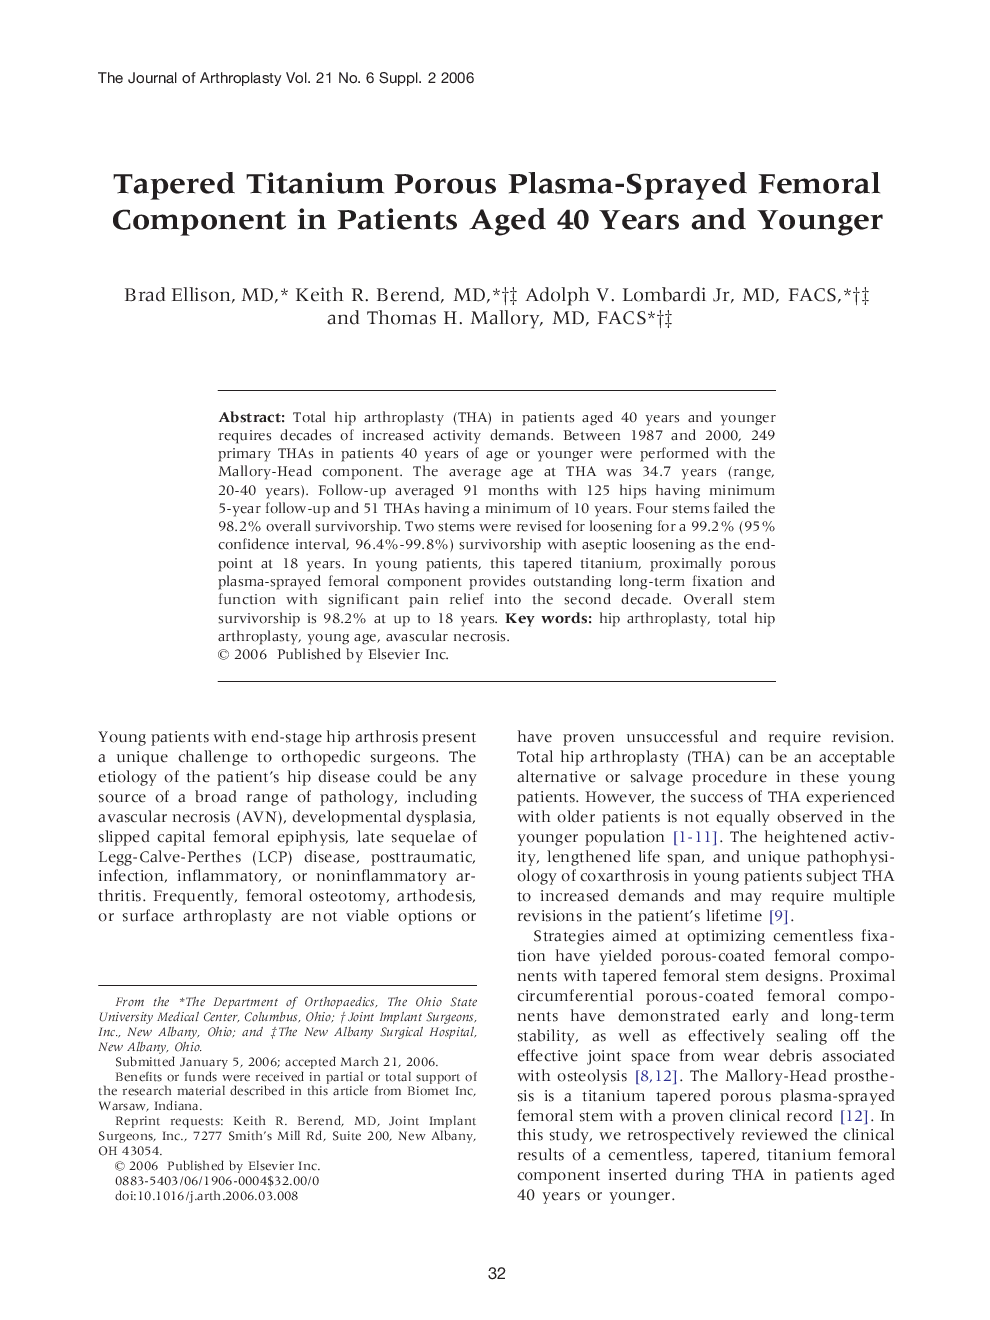 Tapered Titanium Porous Plasma-Sprayed Femoral Component in Patients Aged 40 Years and Younger 